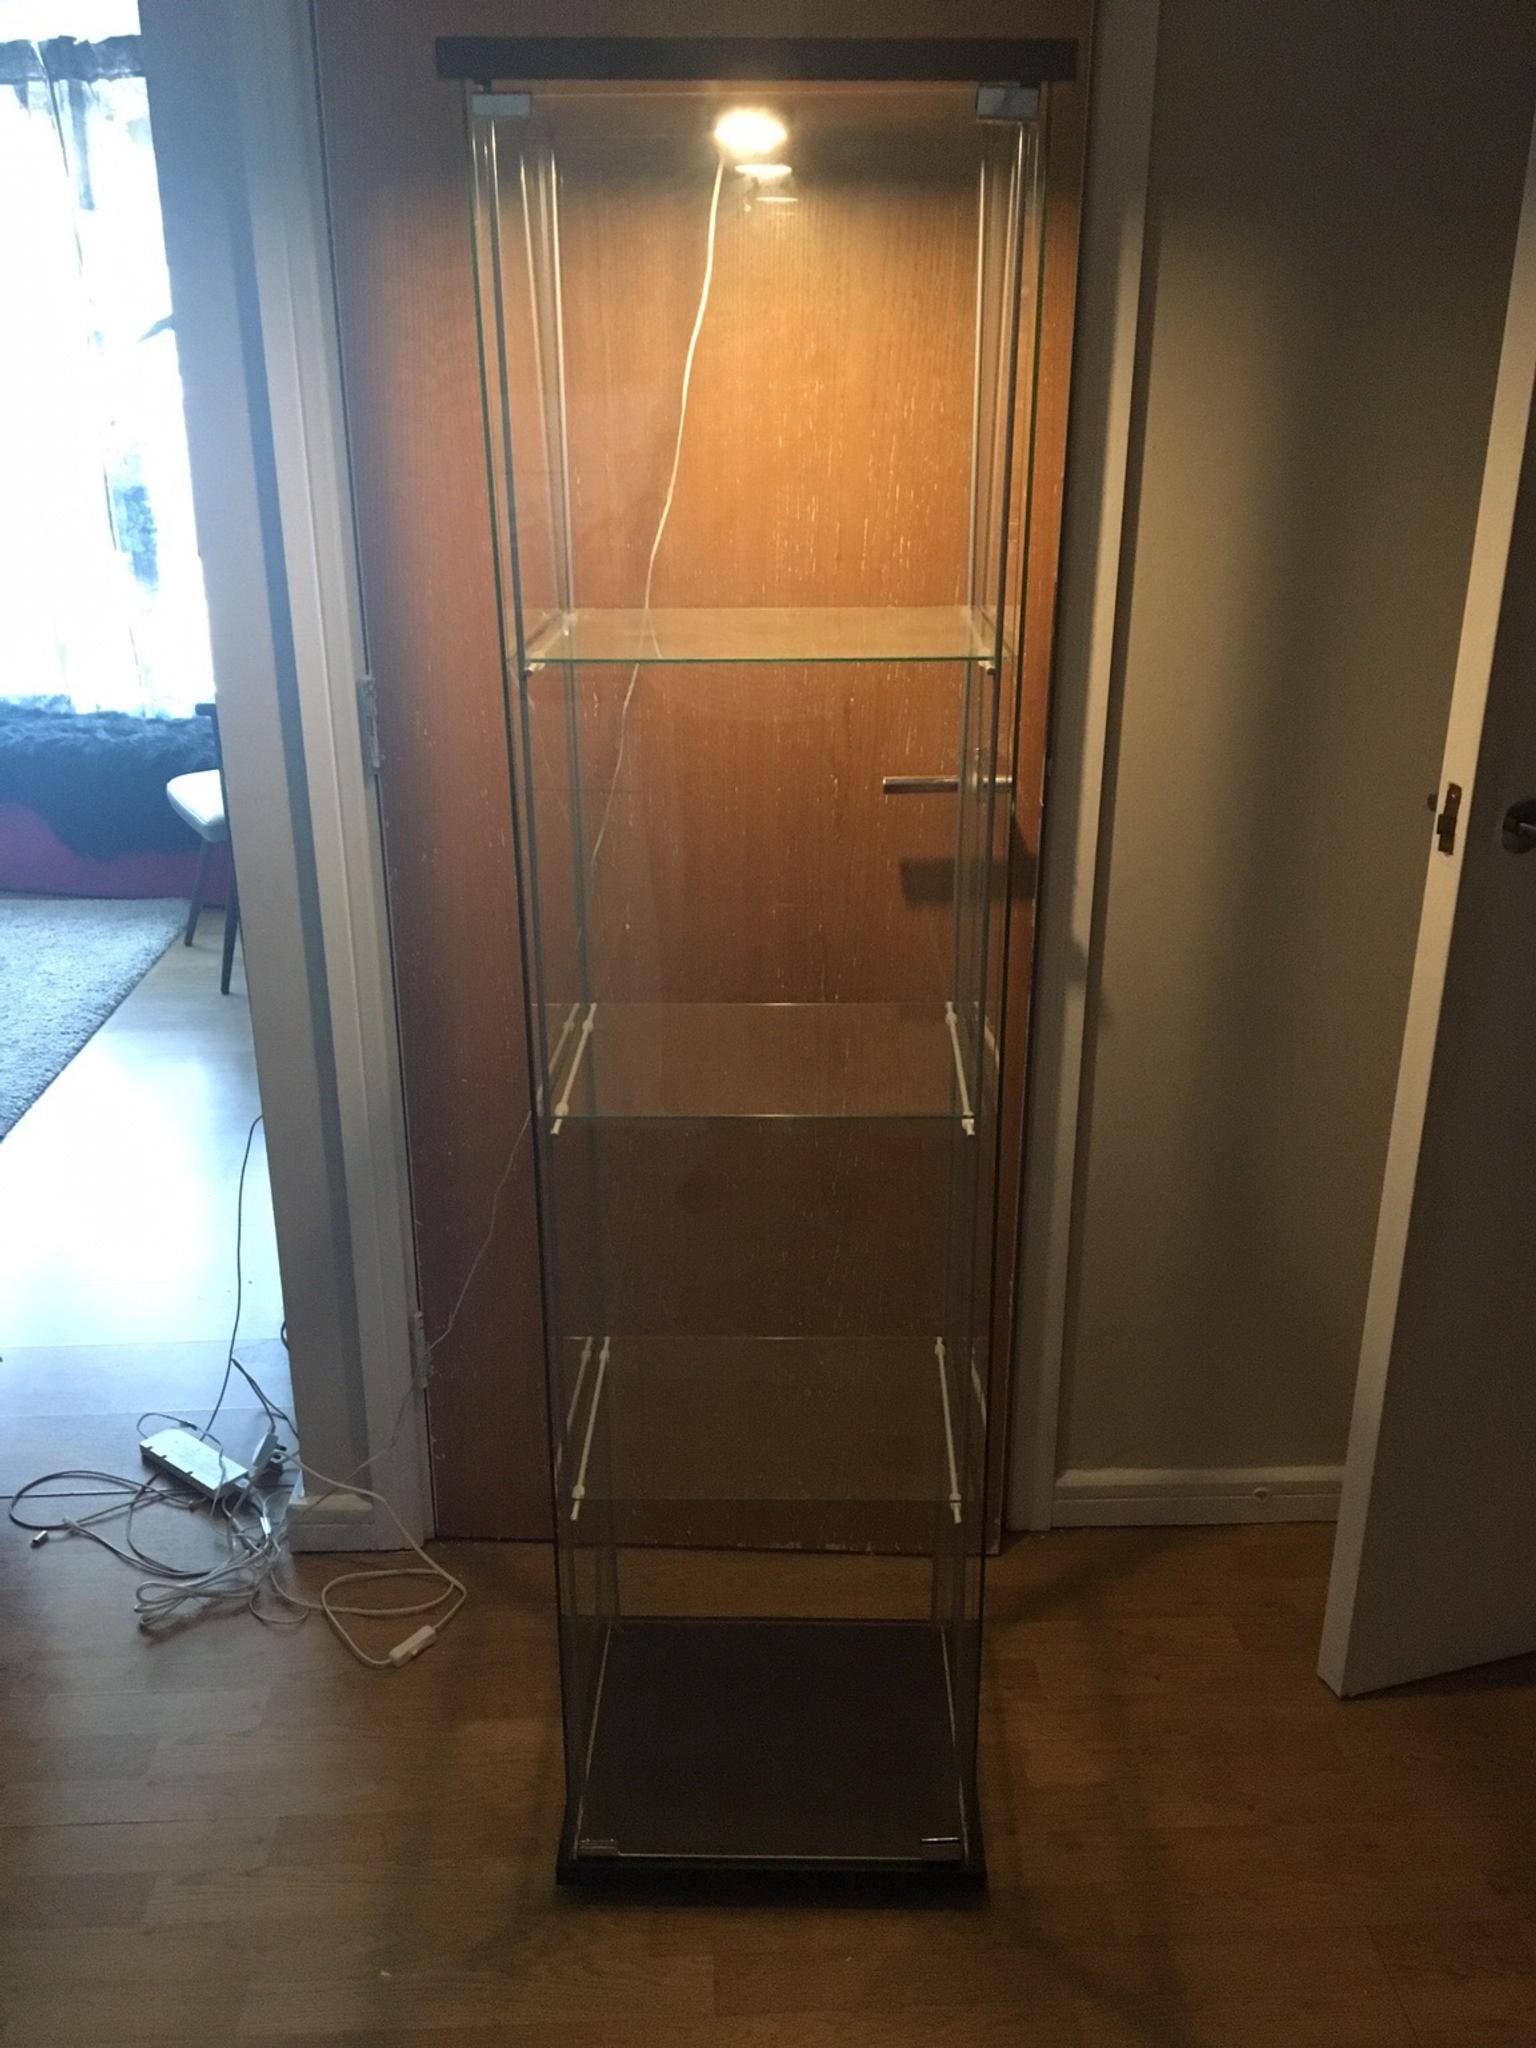 Ikea Detolf Glass Display Cabinet With Light In N16 Hackney For